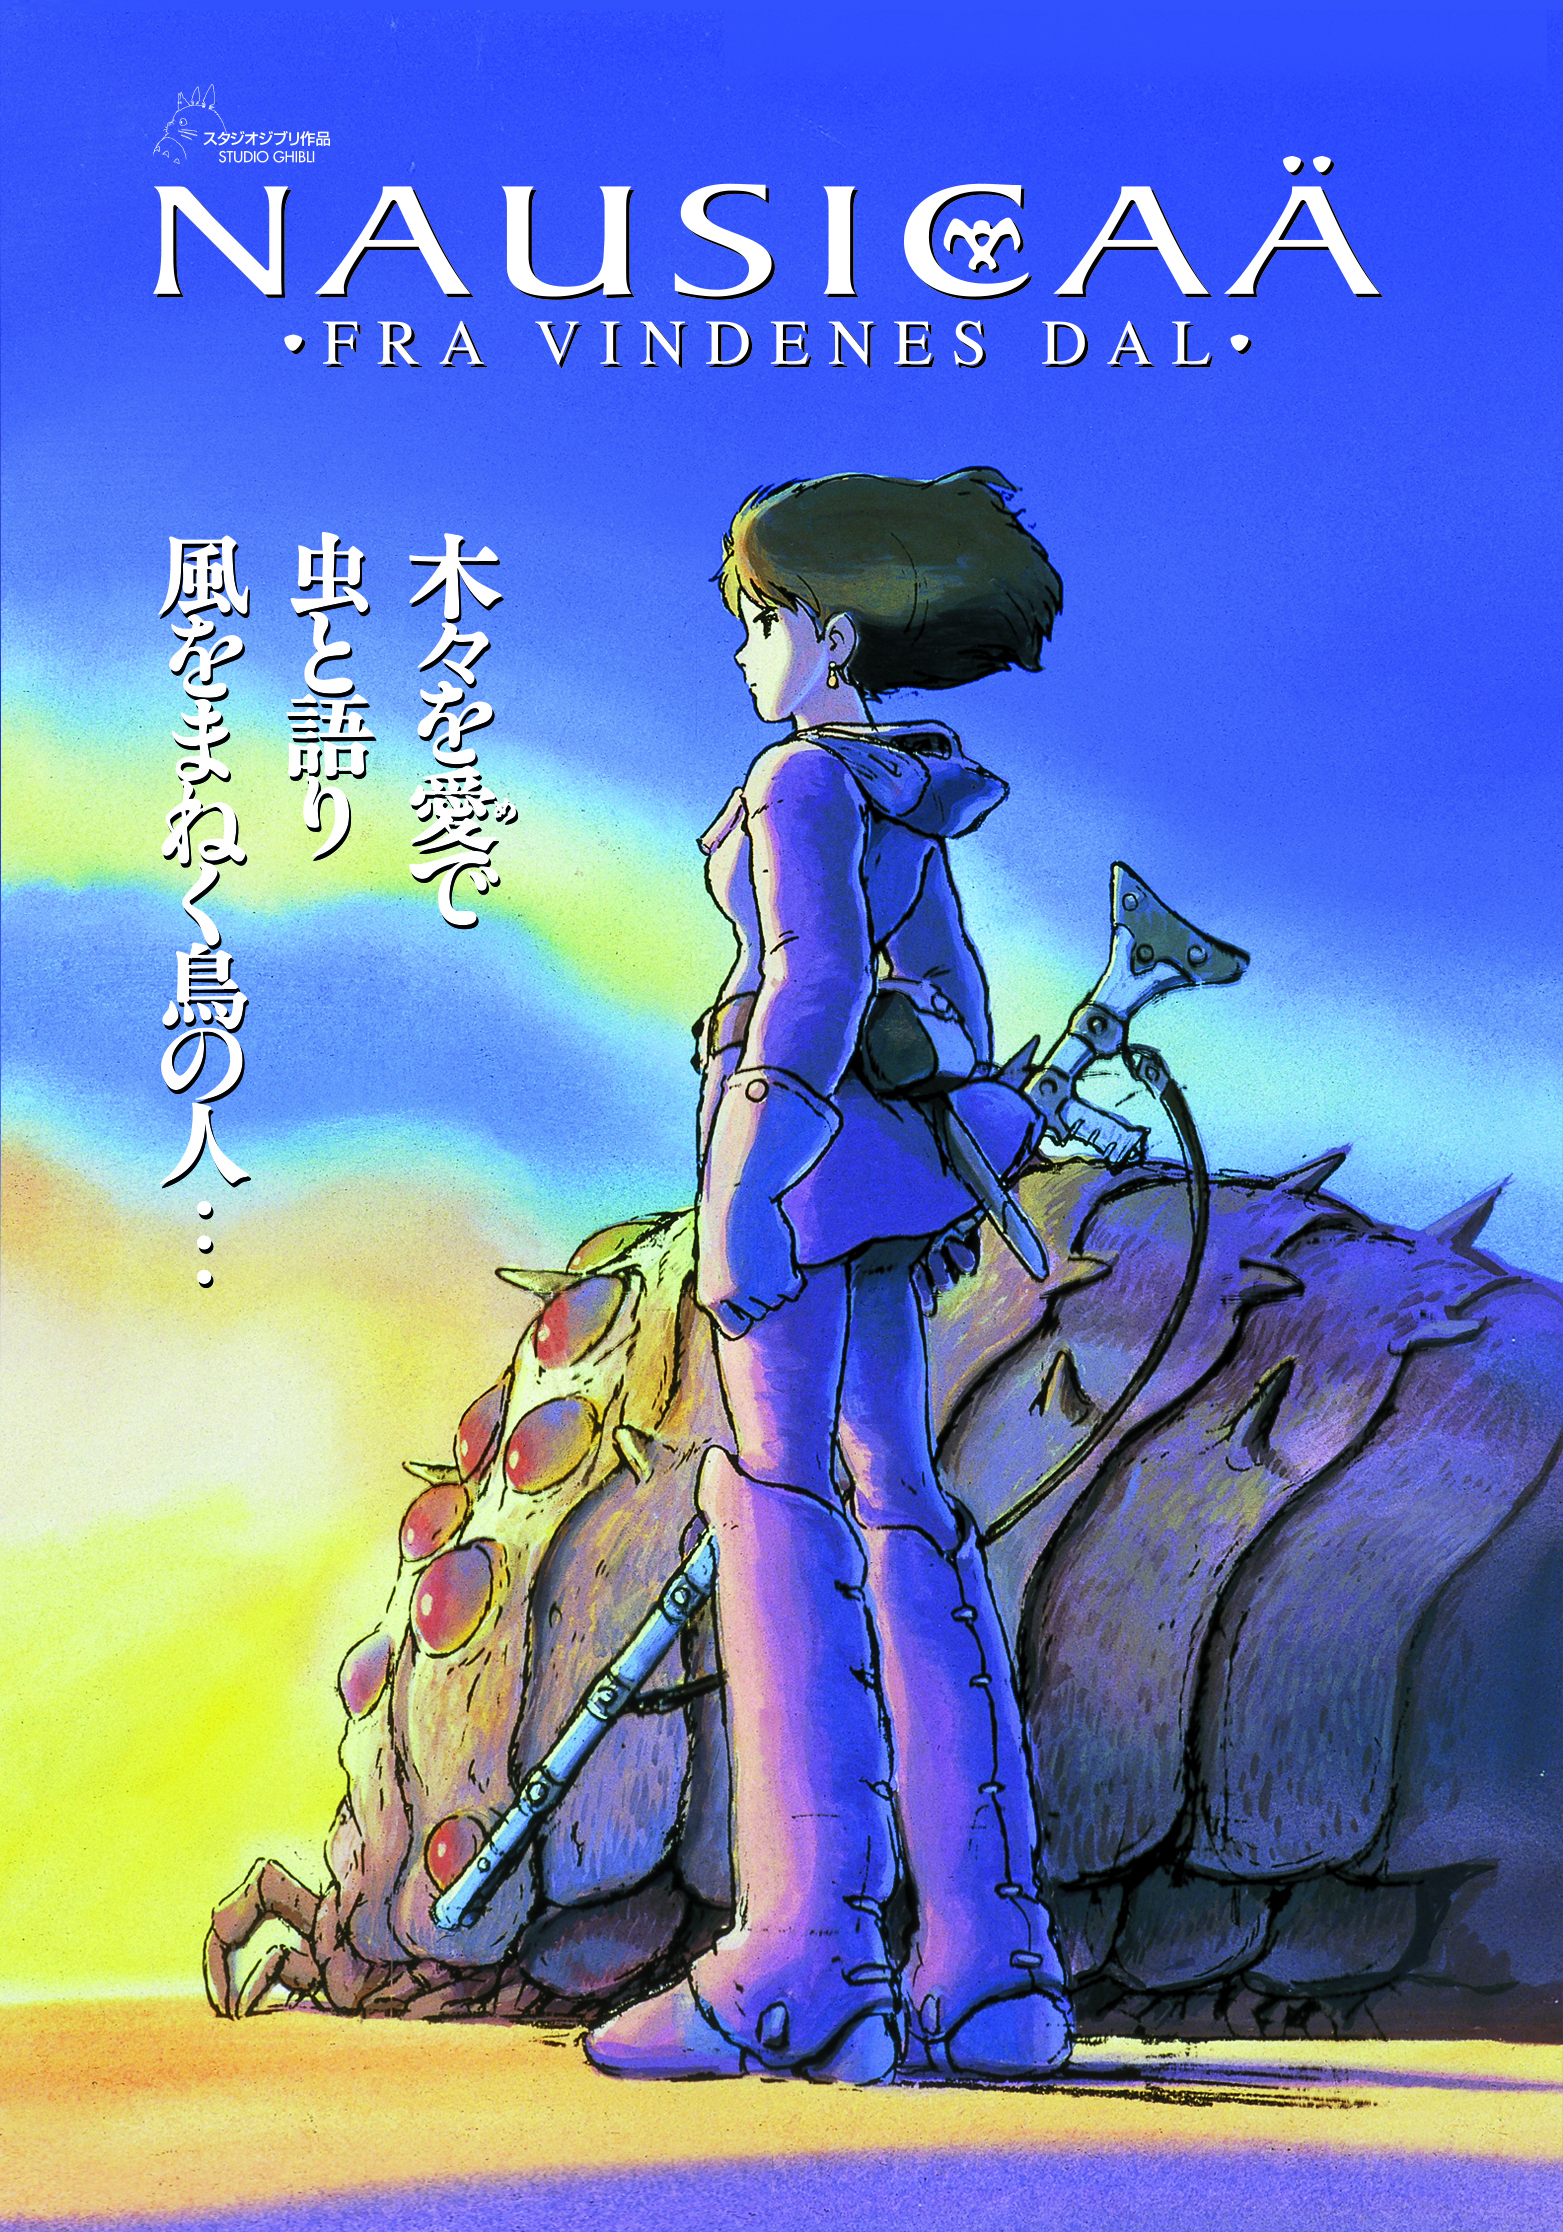 Read more about the article Nausicaä – Fra Vindenes Dal